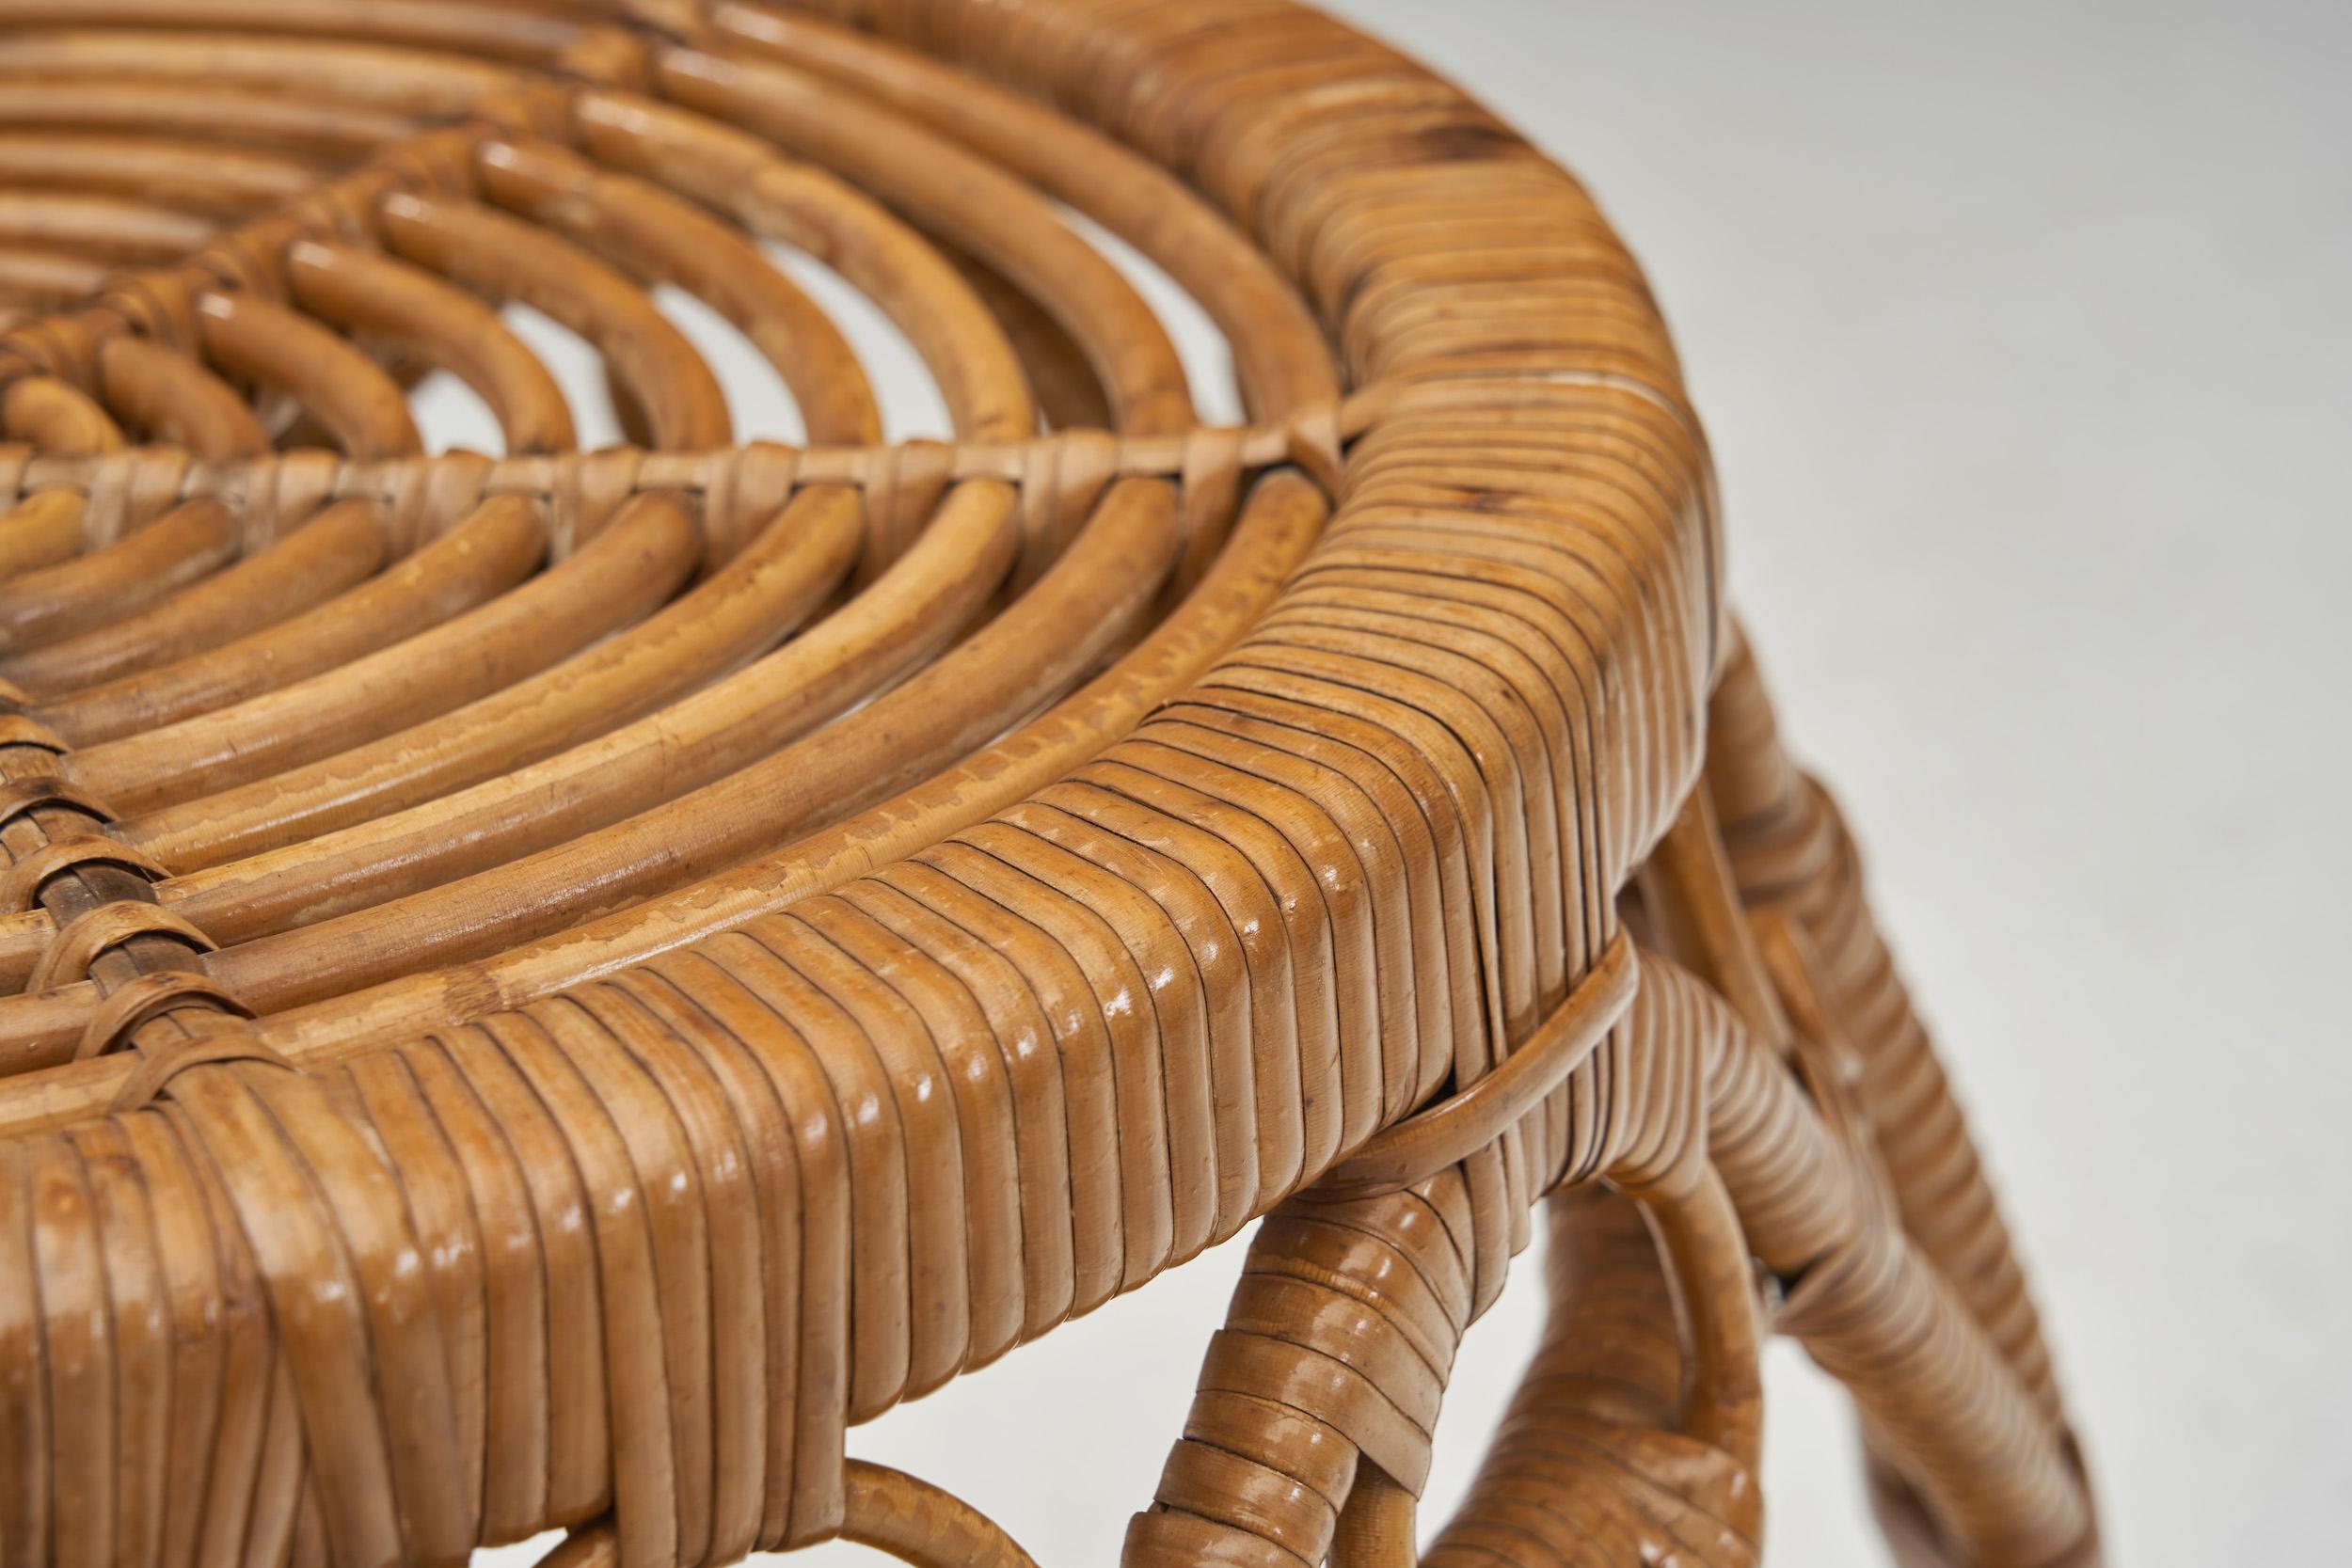 Woven Rattan Stool, Europe Early 20th Century For Sale 7